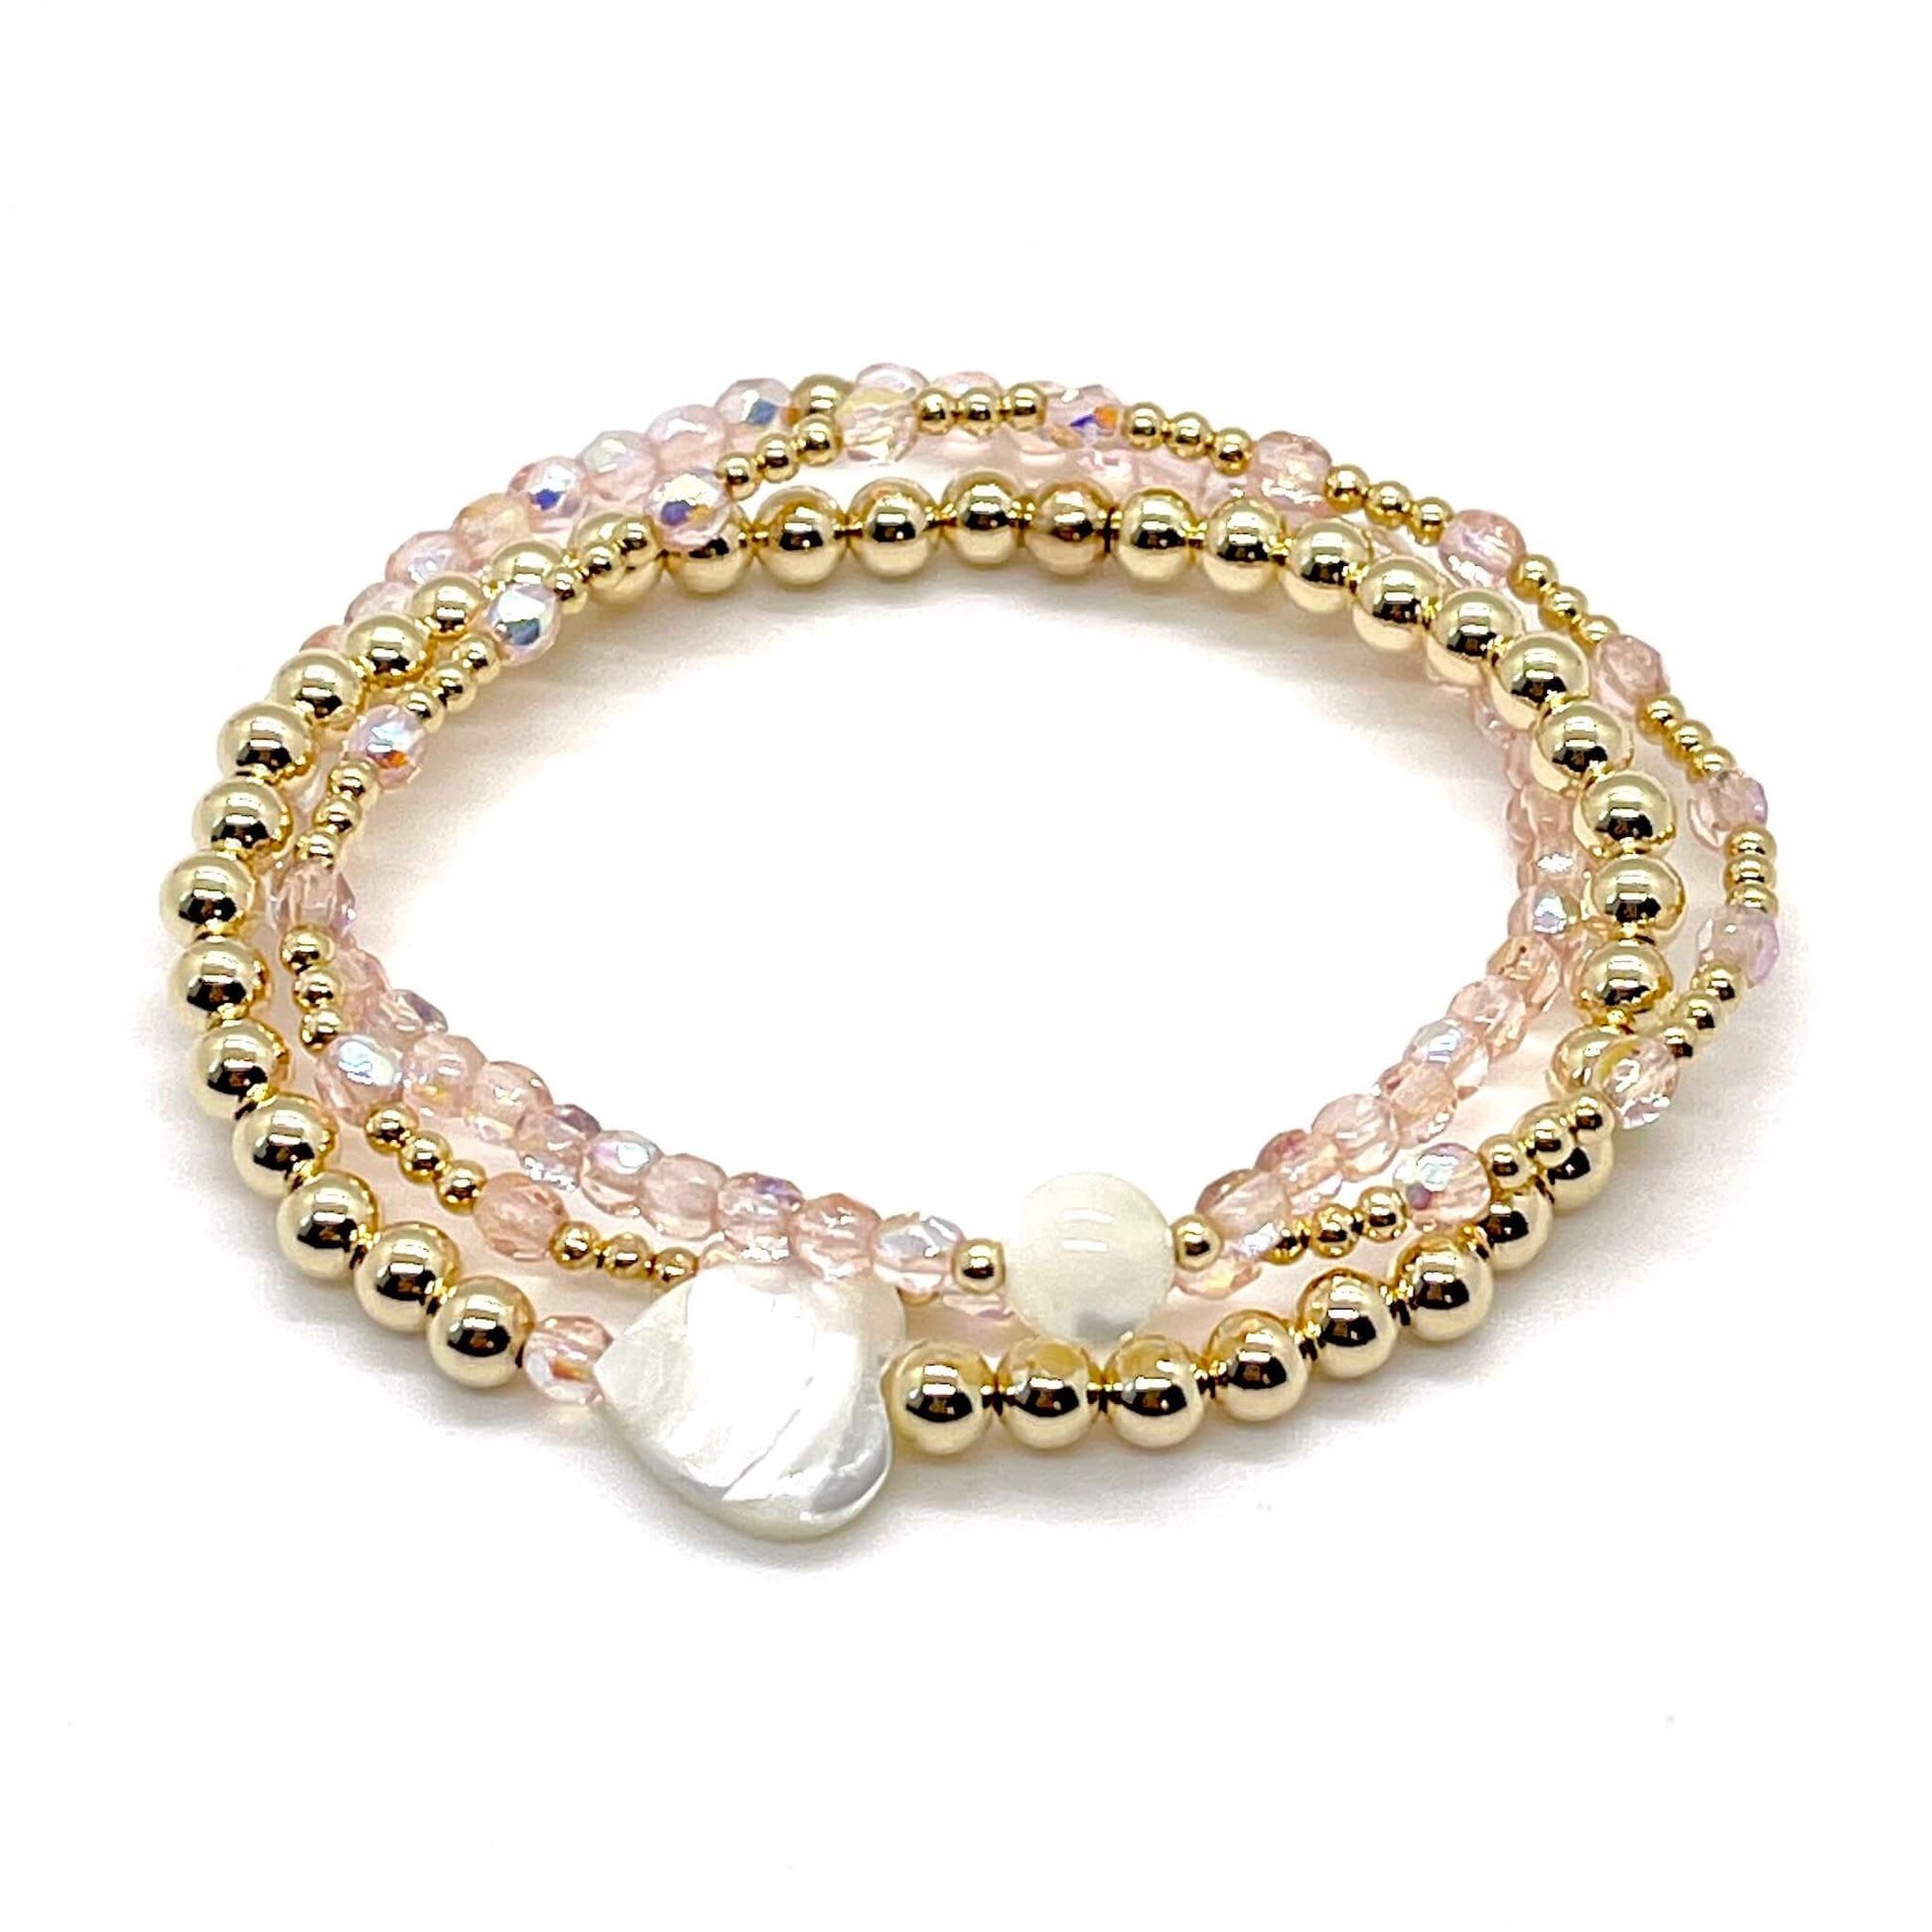 Blush-rose crystal and gold bracelet stack of 3. Womens handmade stretch bracelets wtih round and heart shaped mother-of-pearl accent beads.